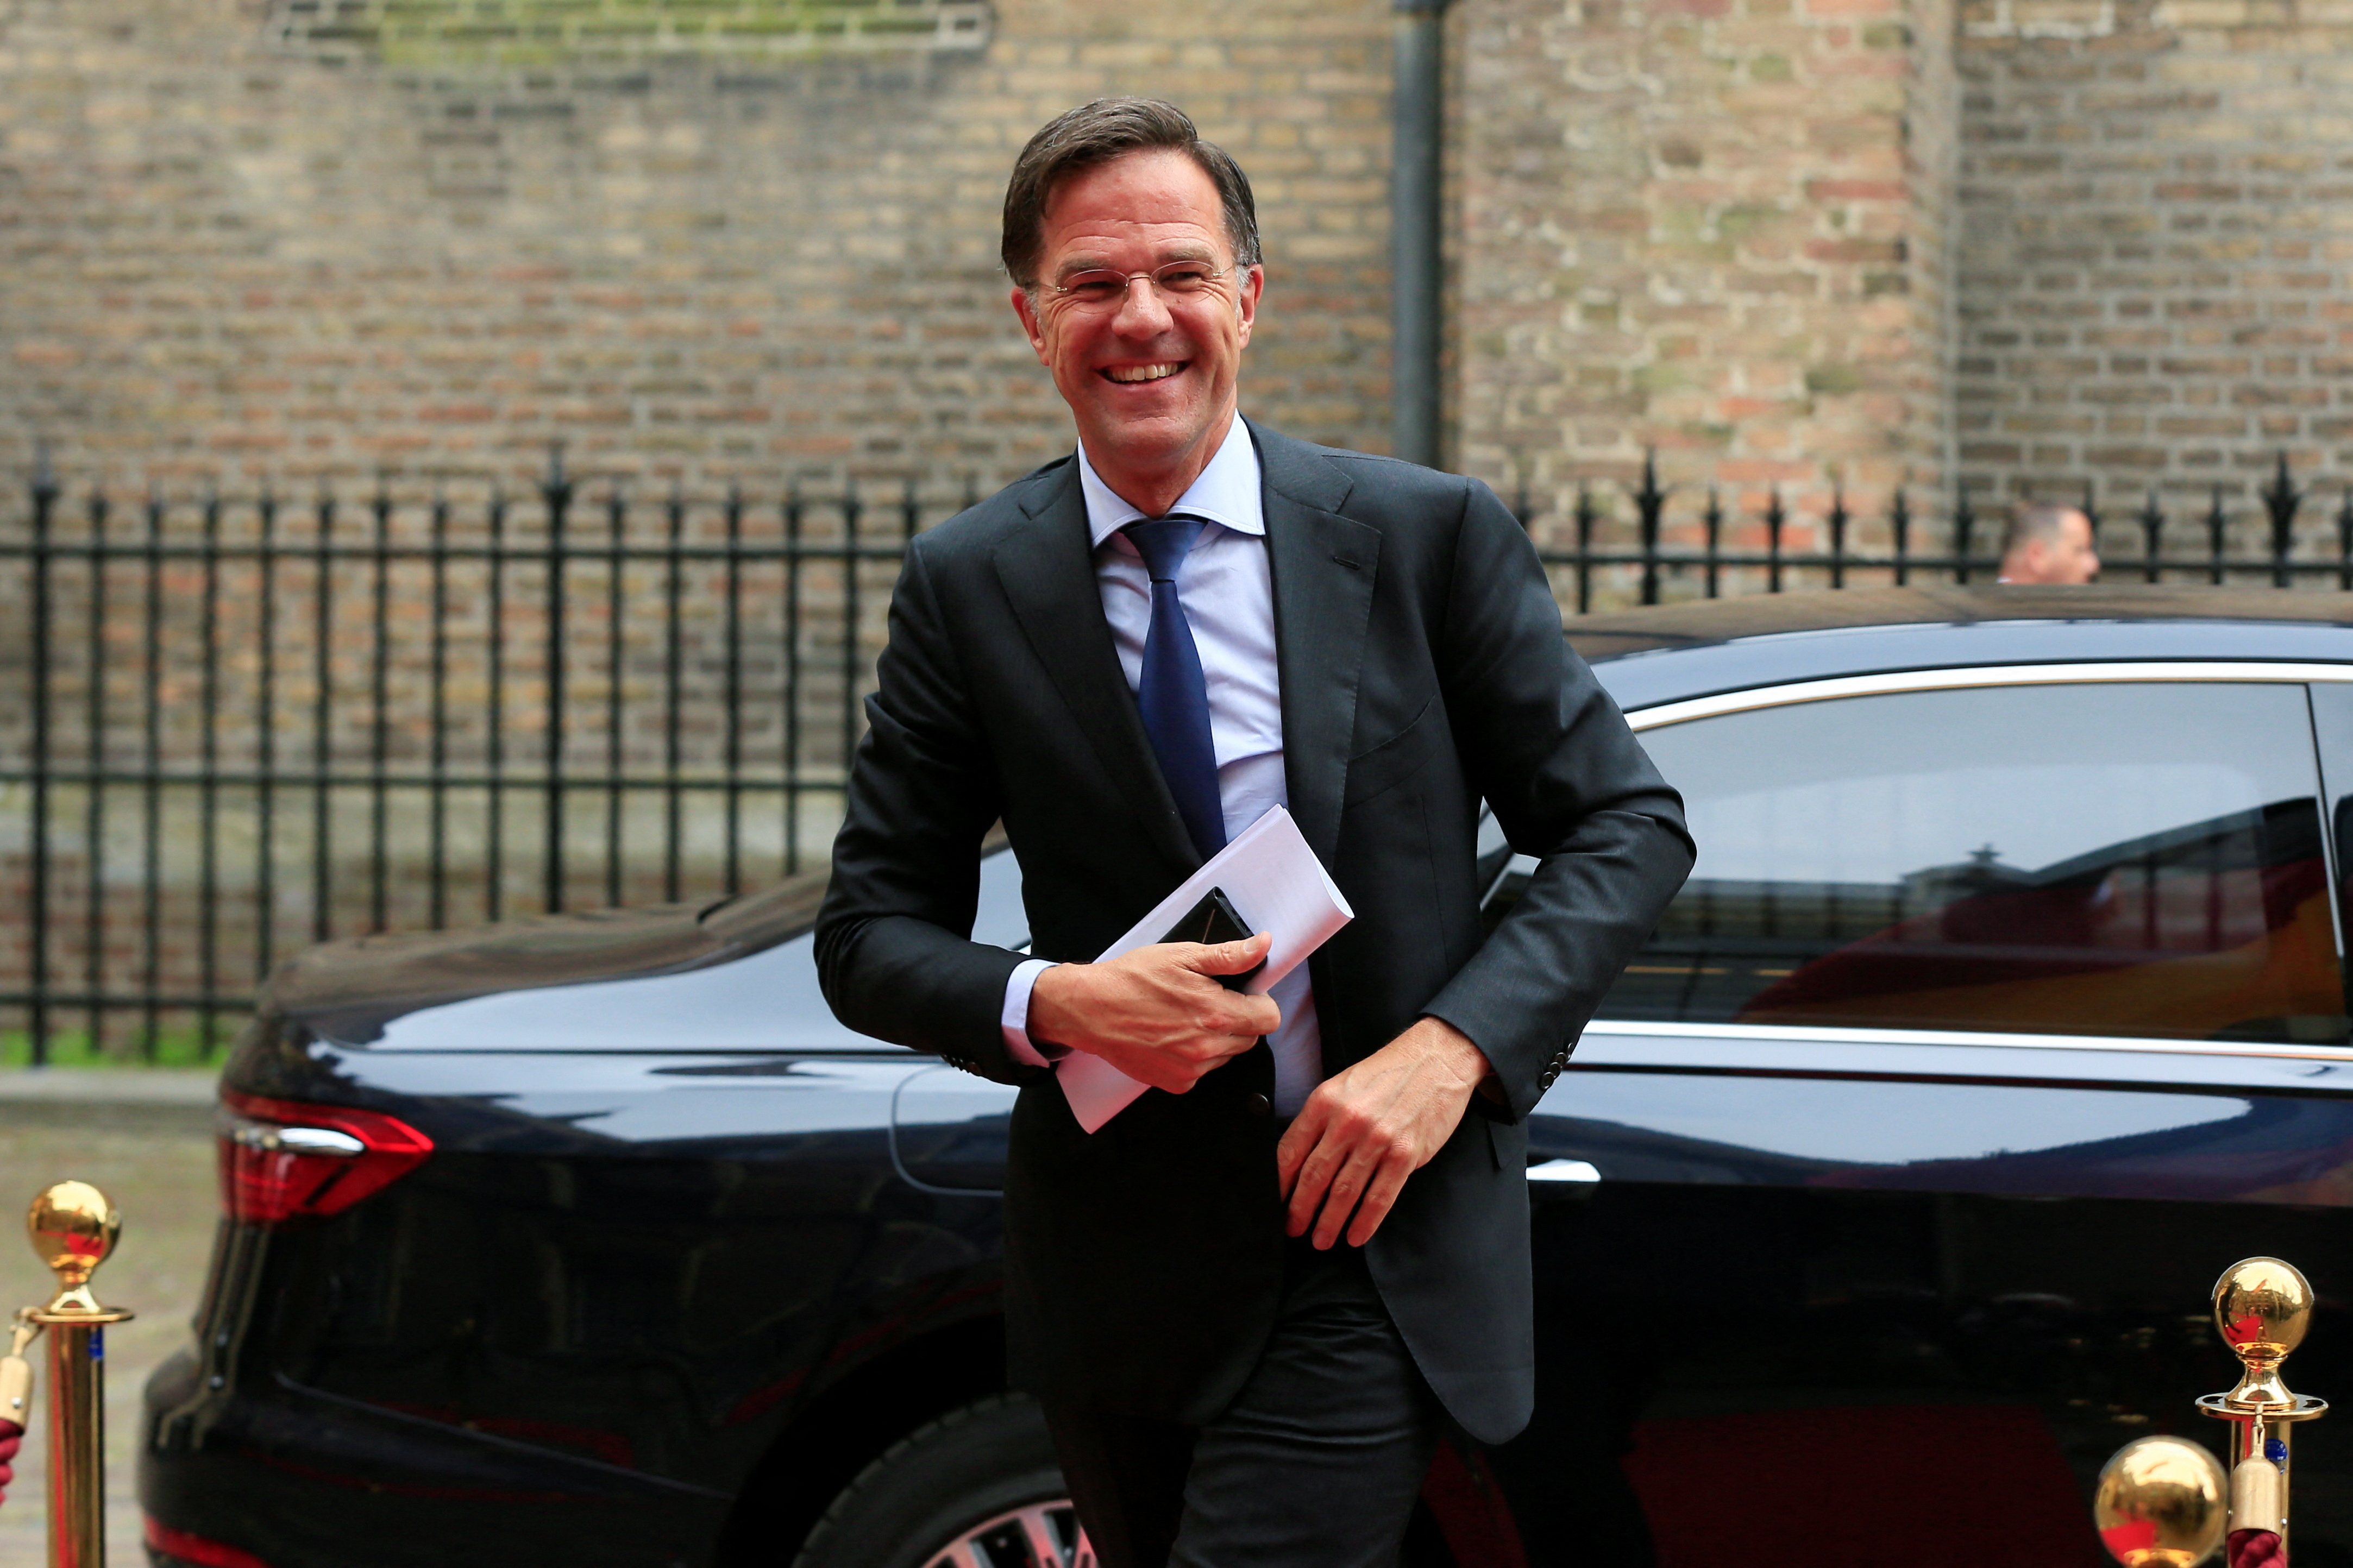 Dutch Prime Minister Mark Rutte arrives for a meeting with German Chancellor Olaf Scholz in The Hague, Netherlands, May 19, 2022. REUTERS/Eva Plevier